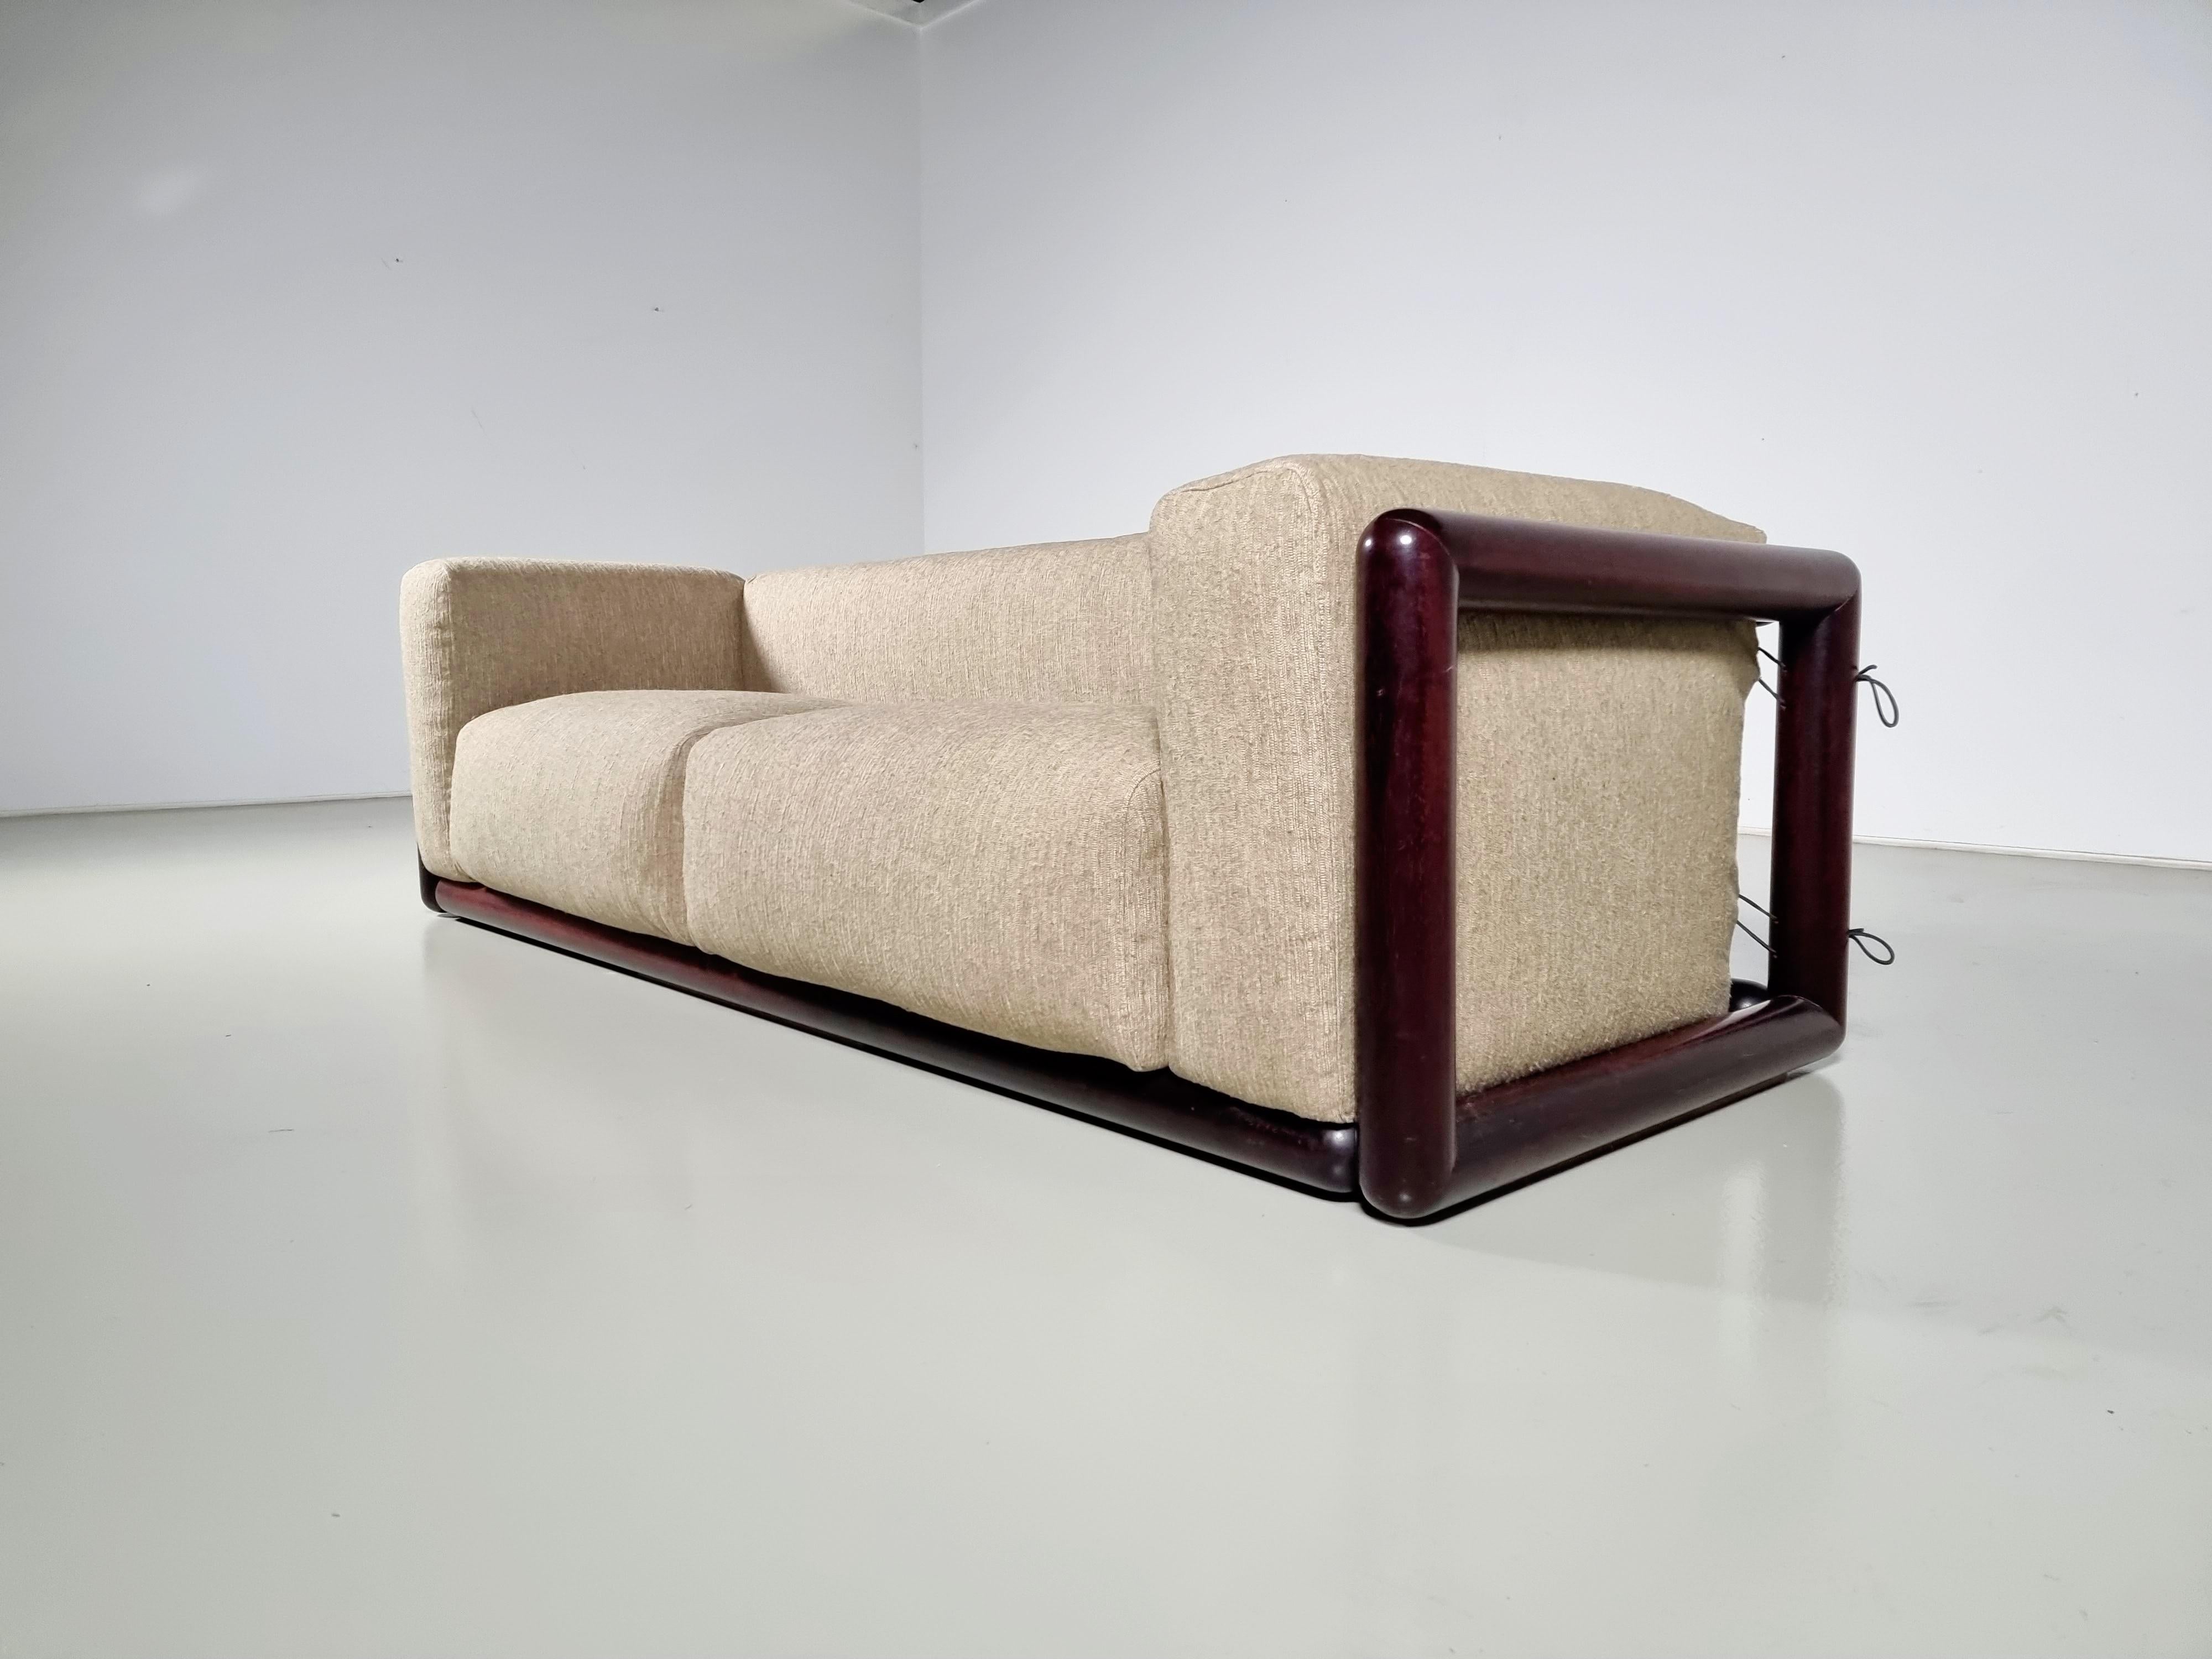 Cornaro sofa designed by Carlo Scarpa for Simon International, Italy 1973. 

Made out of solid dark stained hardwood and re-upholstered in a high-end textured beige fabric by Bruder. A classy combination. The foam is perfect and the cushions are